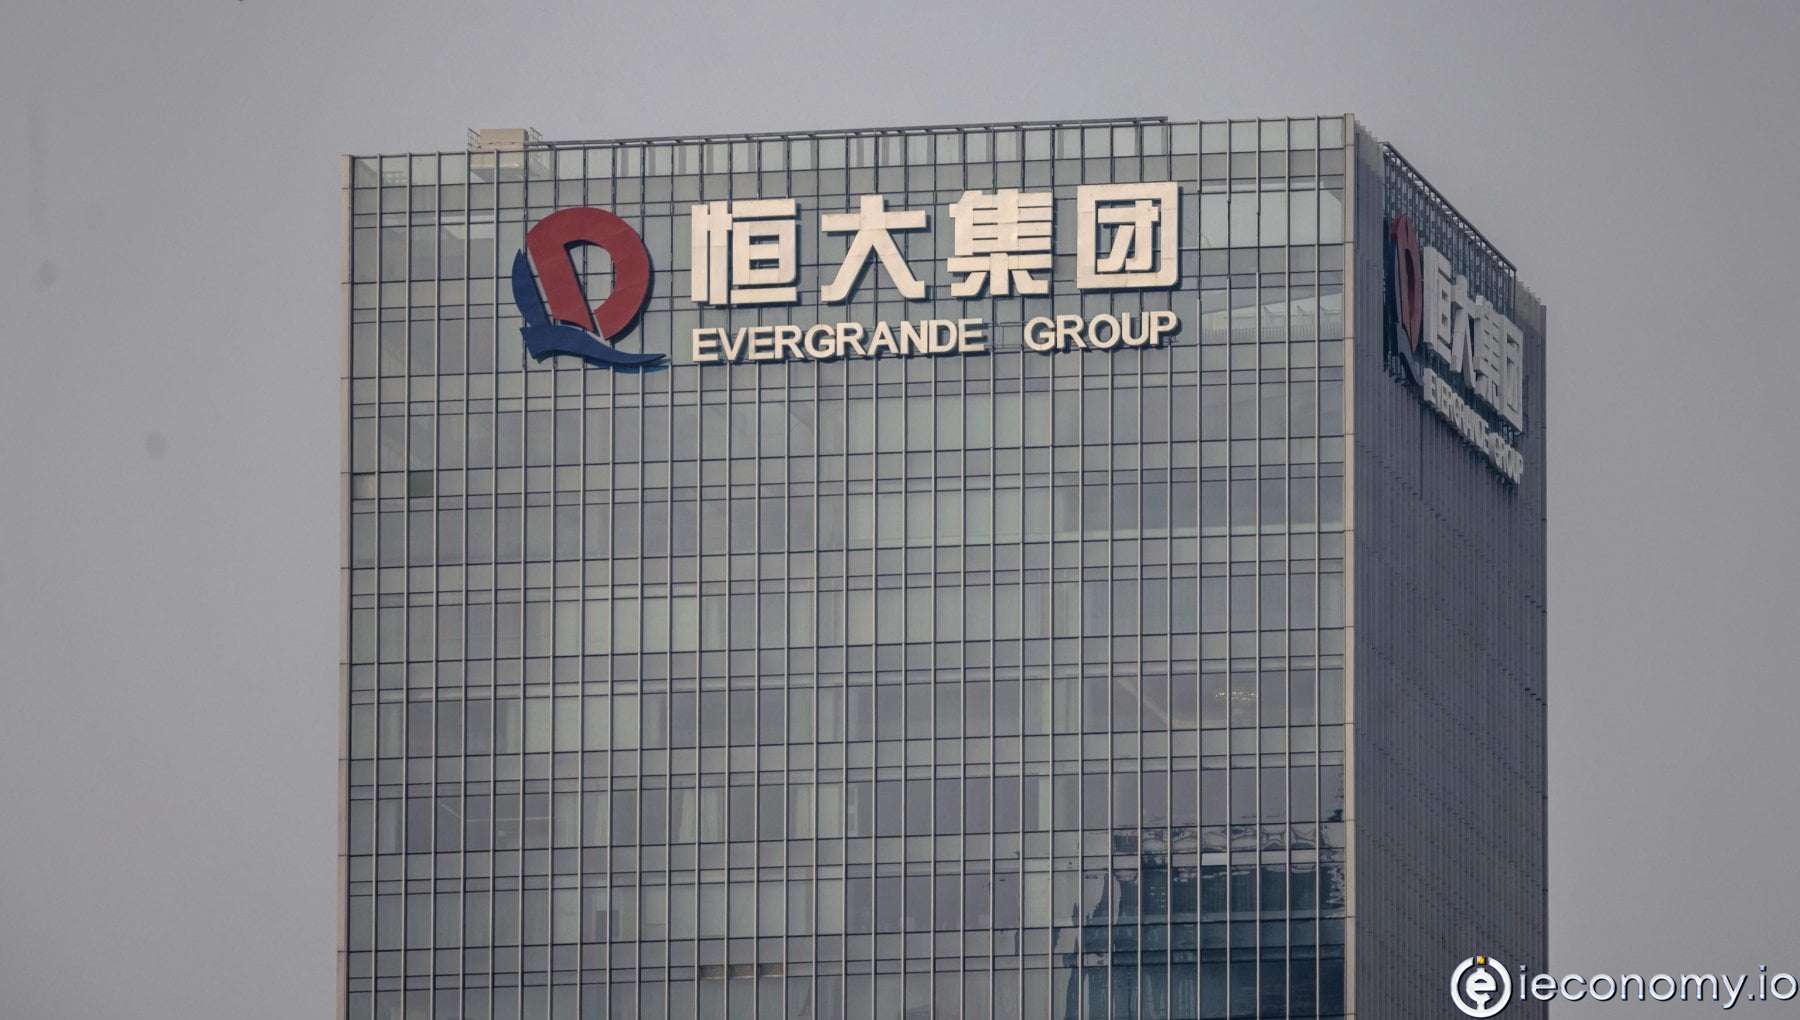 Evergrande is on the verge of a billion-dollar stake sale